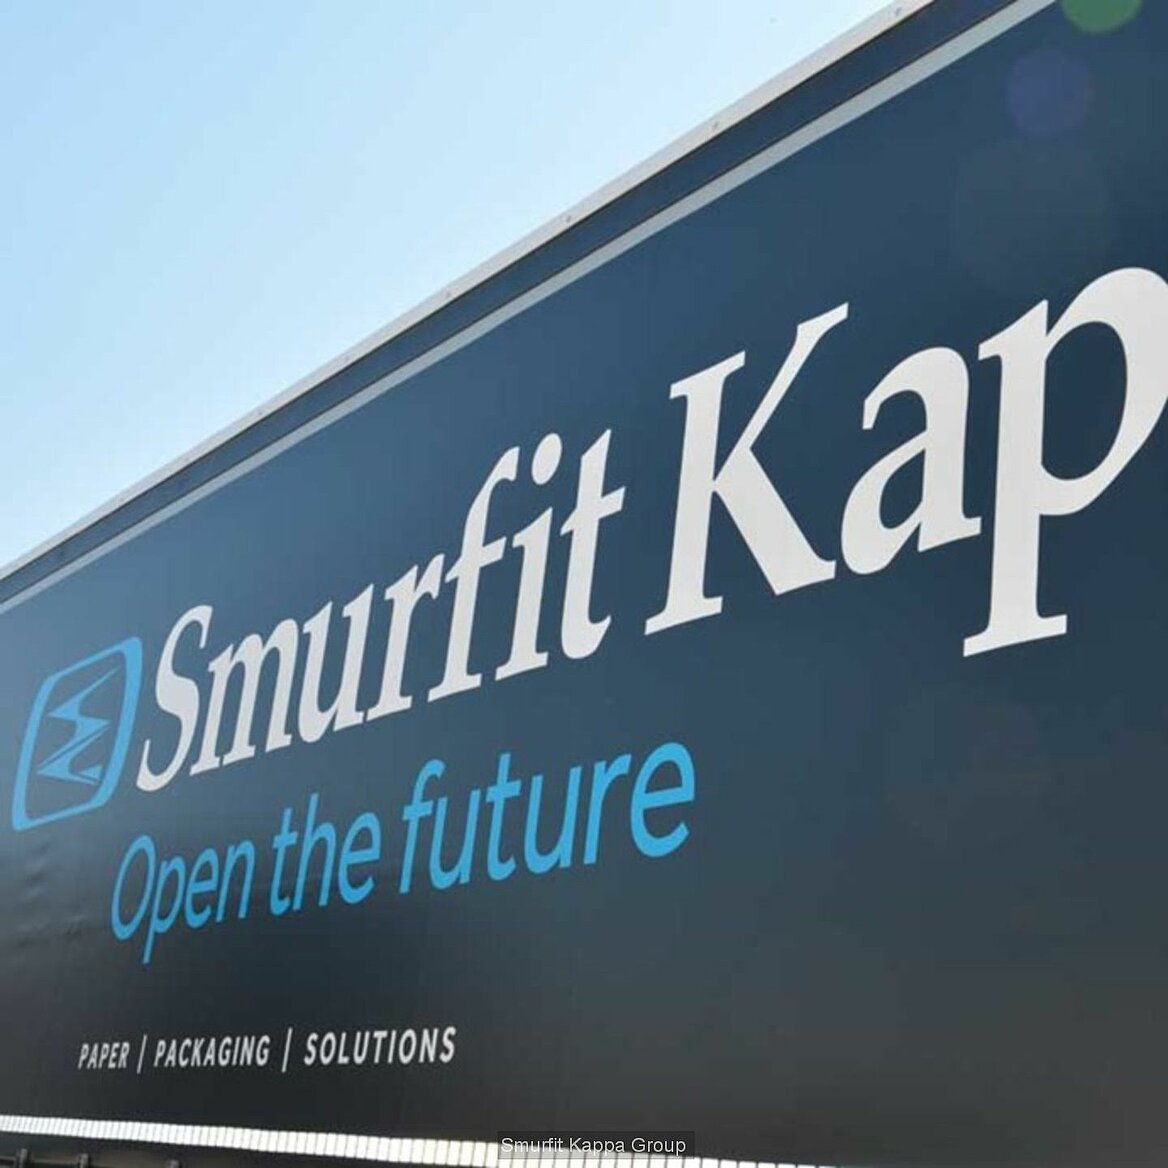 Smurfit Kappa increased sales, Ebitda and deliveries in Q1 2022